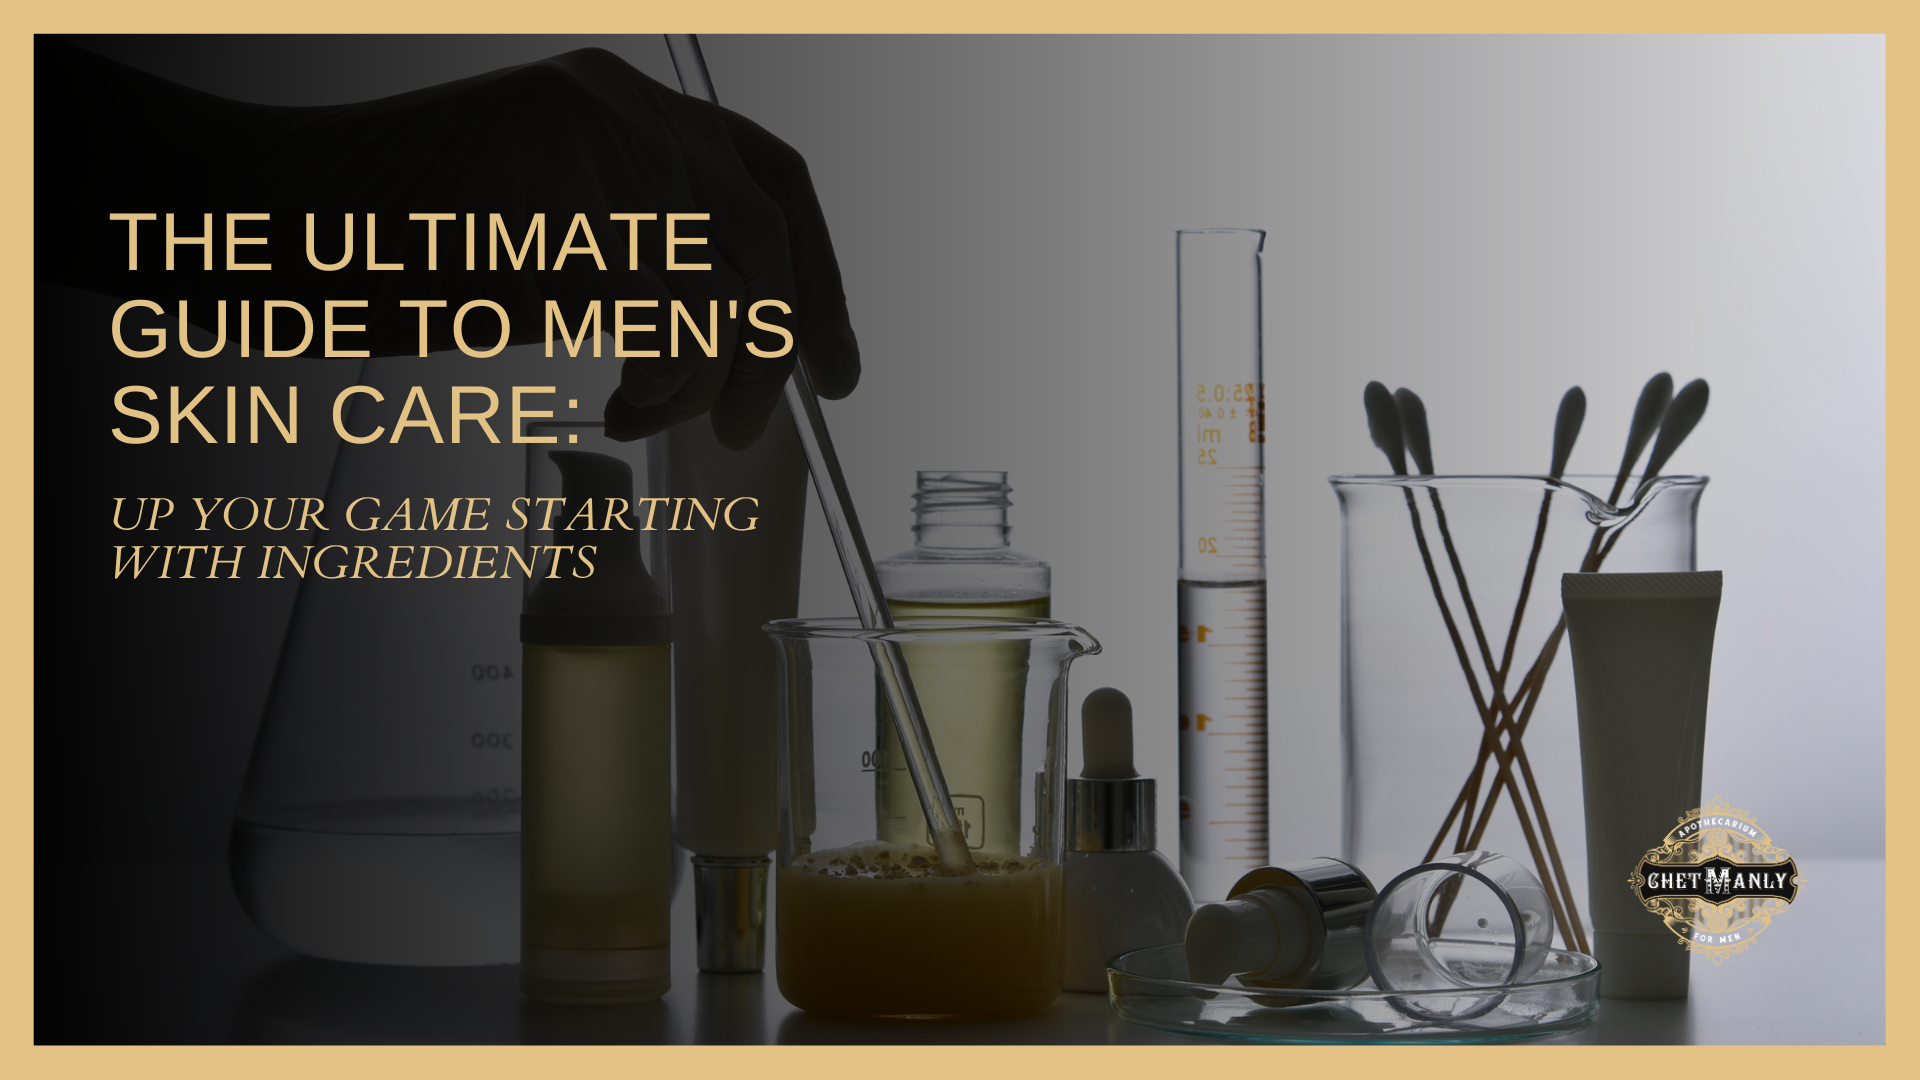 The Ultimate Guide to Men's Skin Care: Up Your Game starting with Ingredients